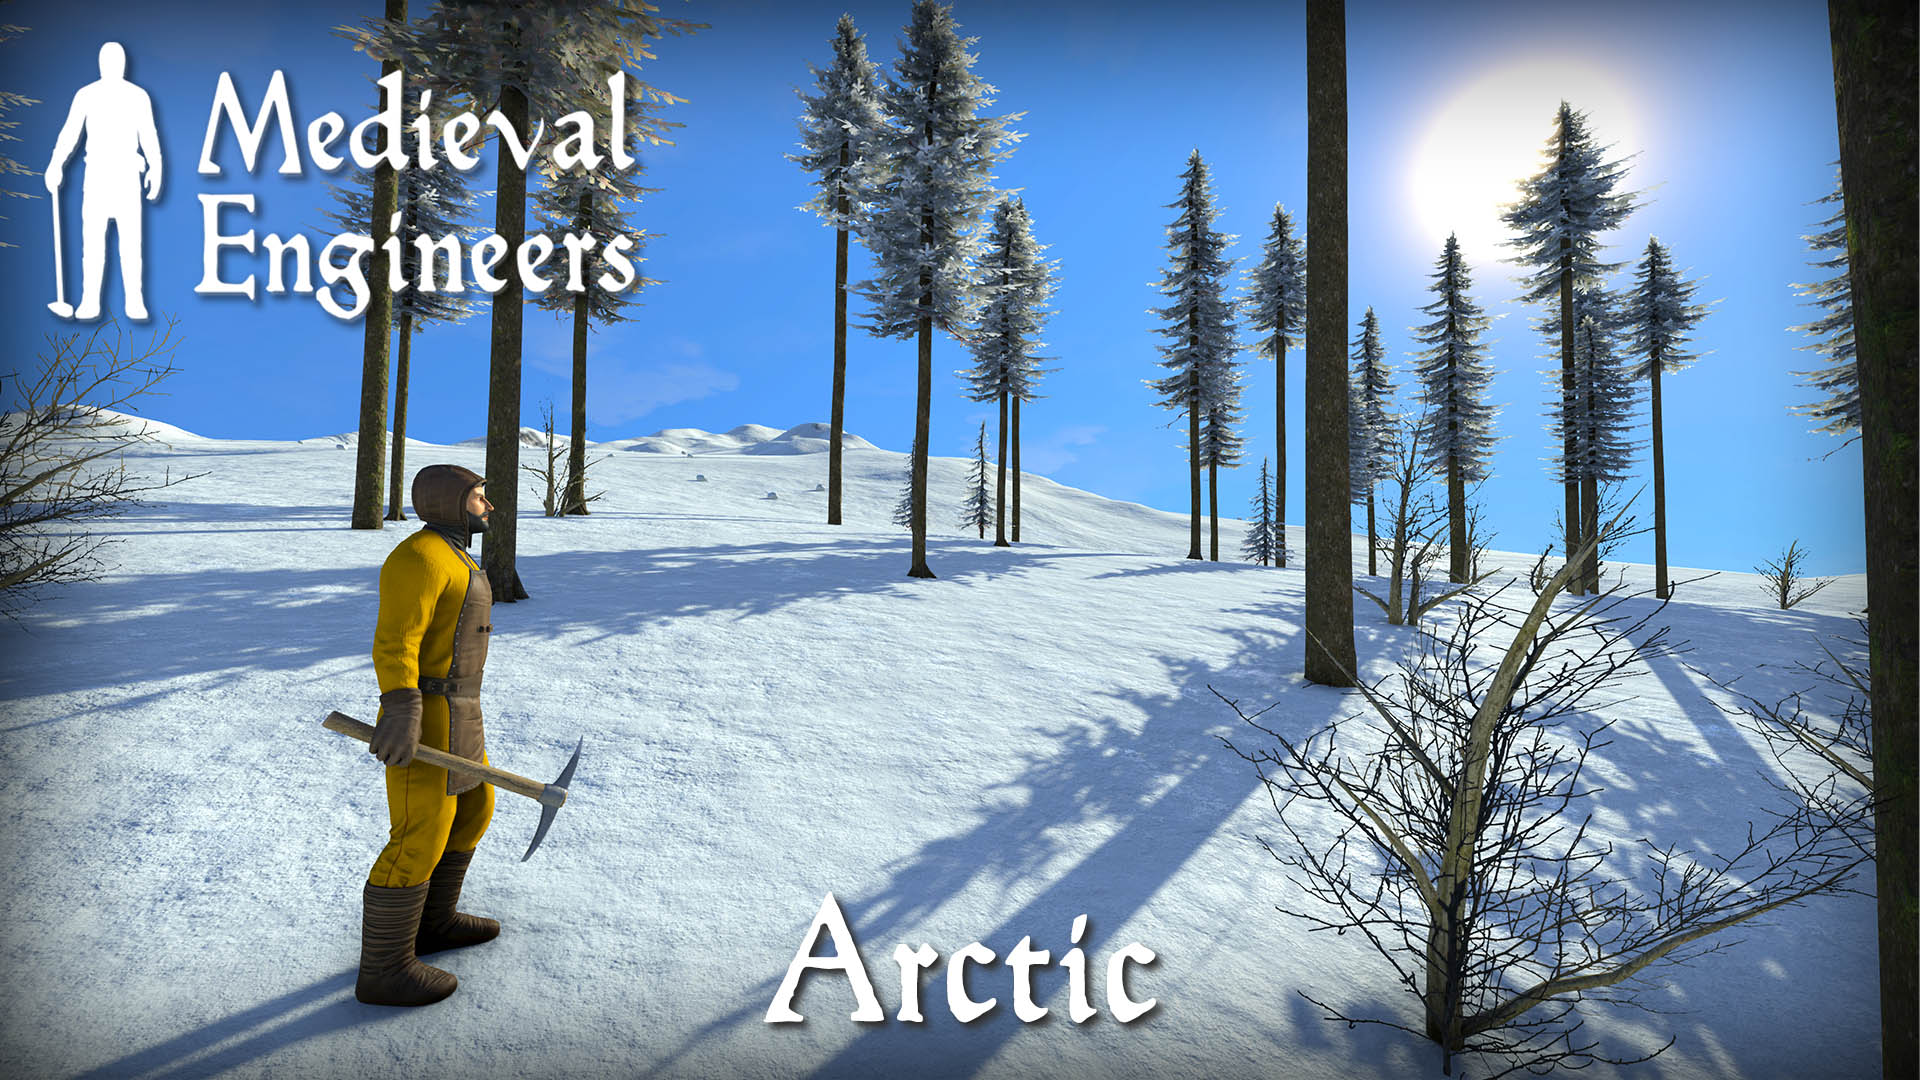 Biomes Arctic2 1 | Update 0.6 – Now With Mechanical Blocks!